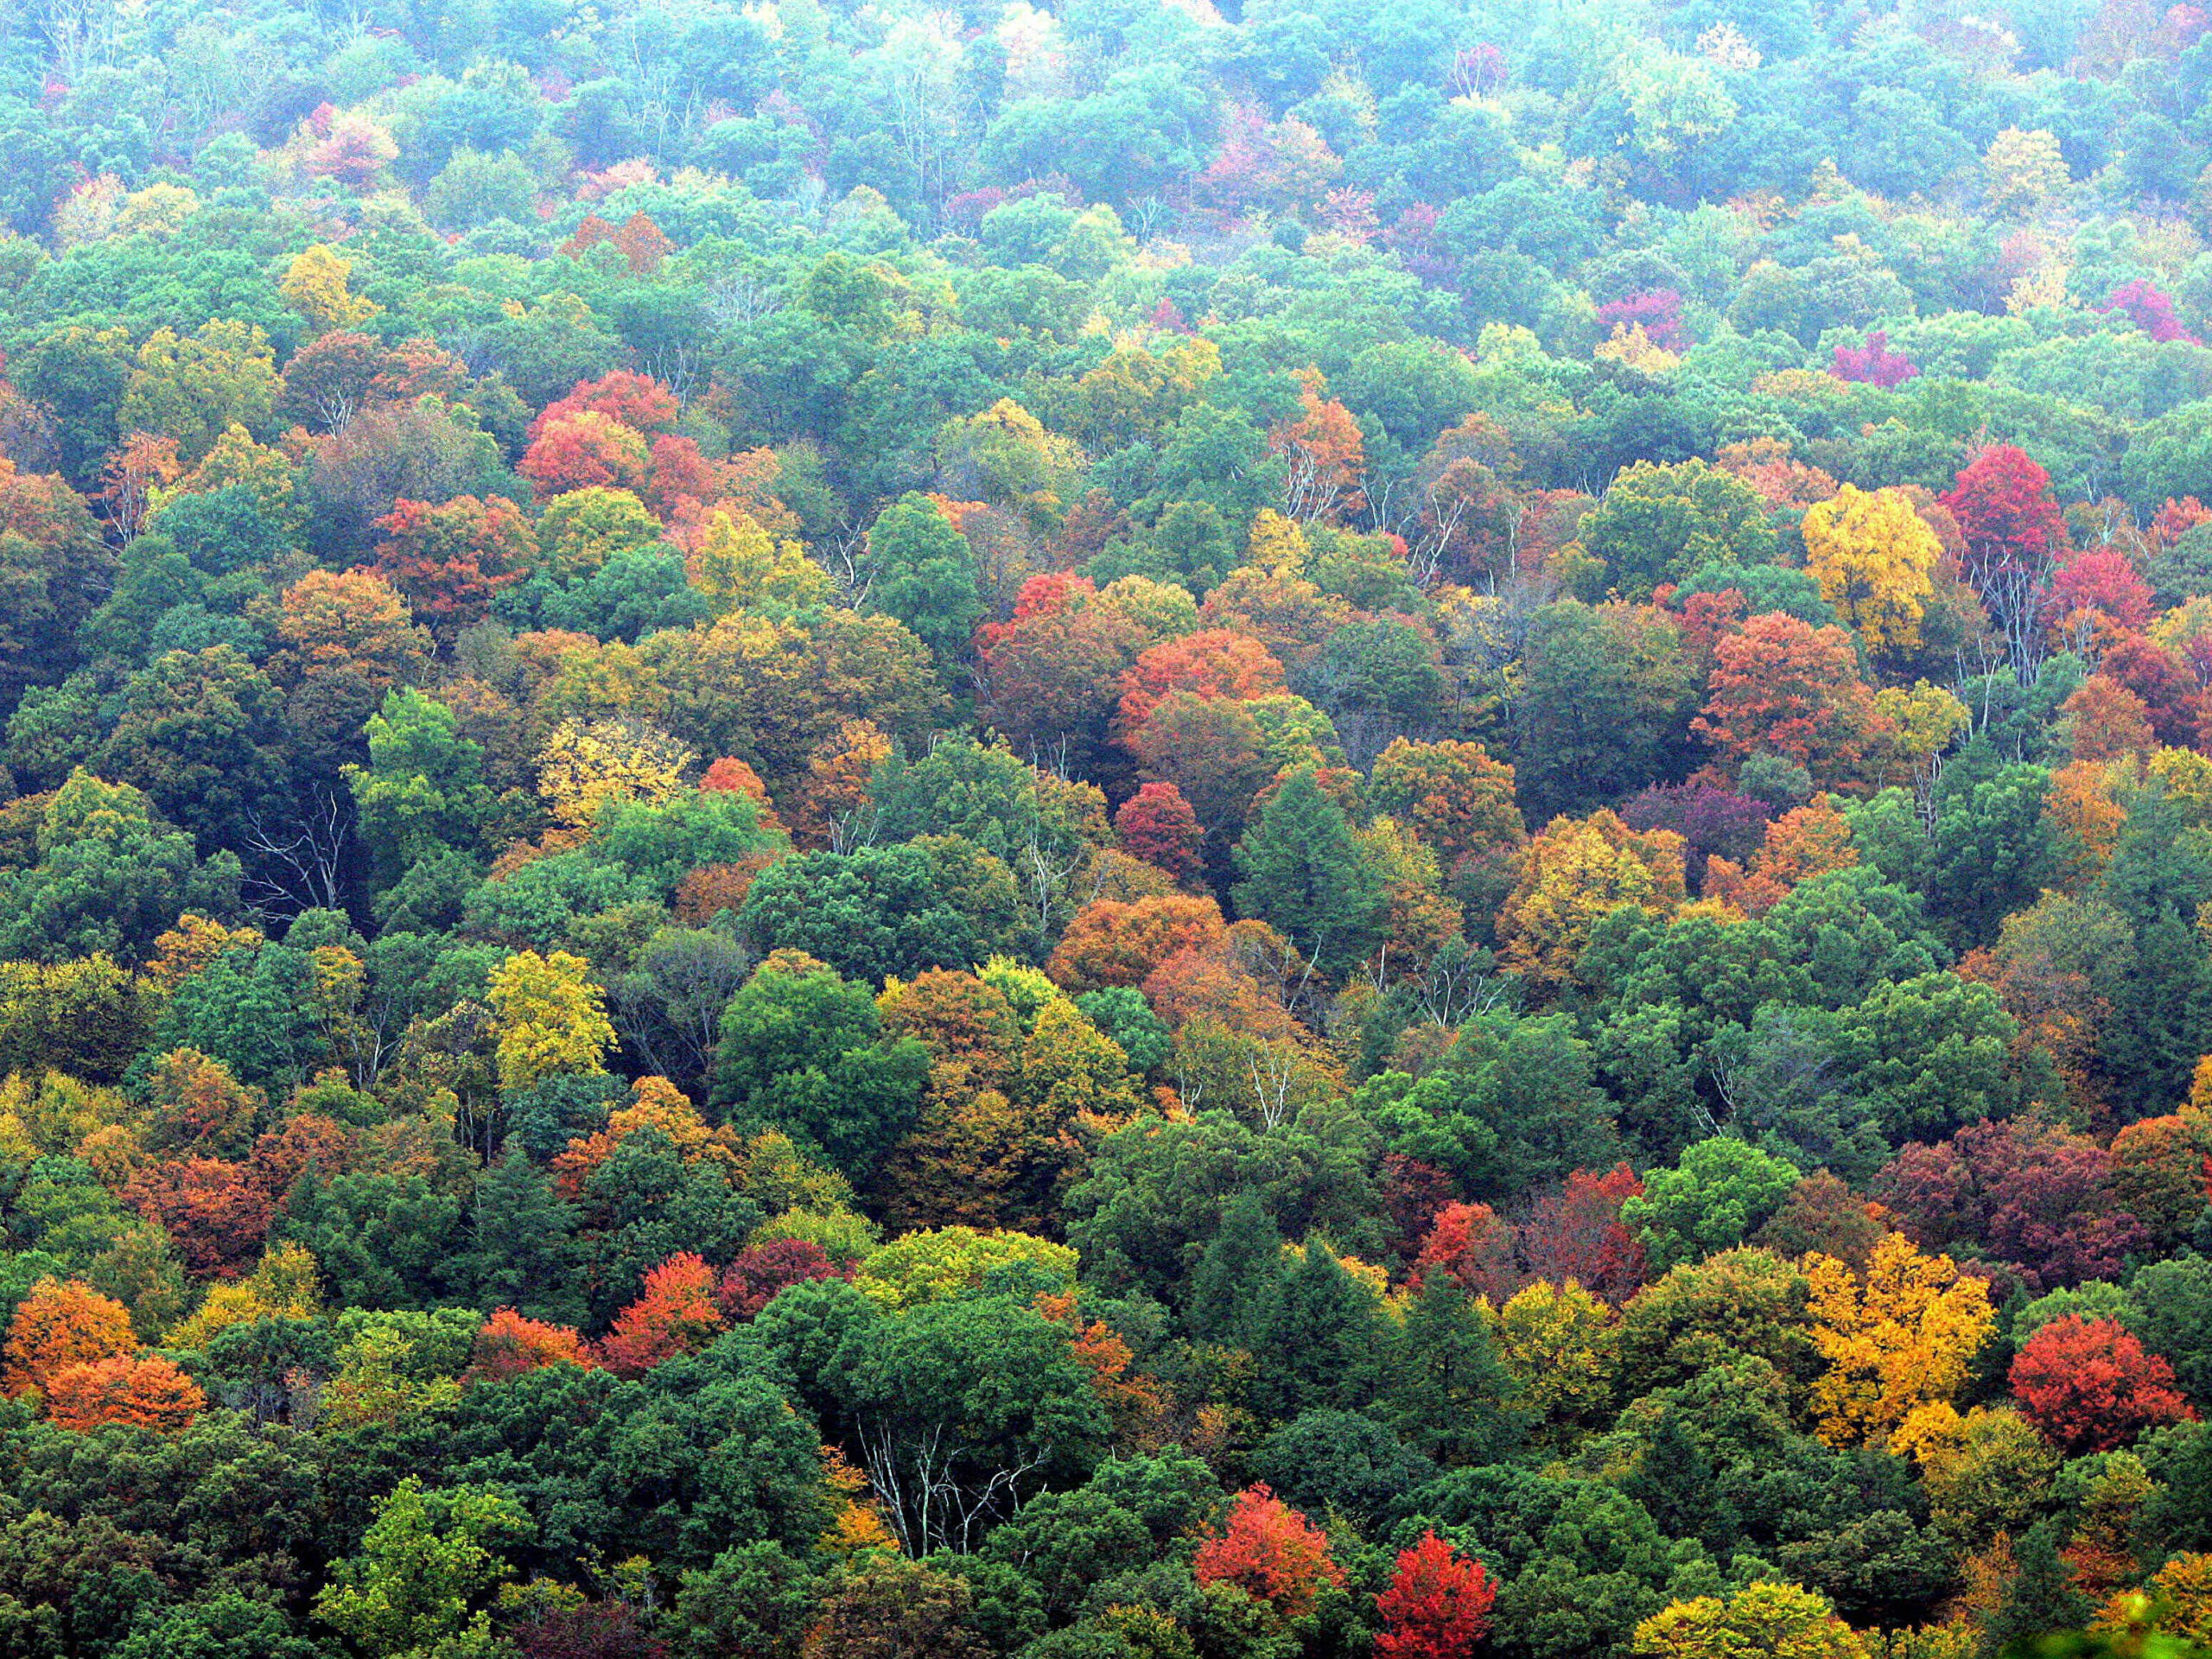 Trees change color in New York's Bear Mountain State Park.